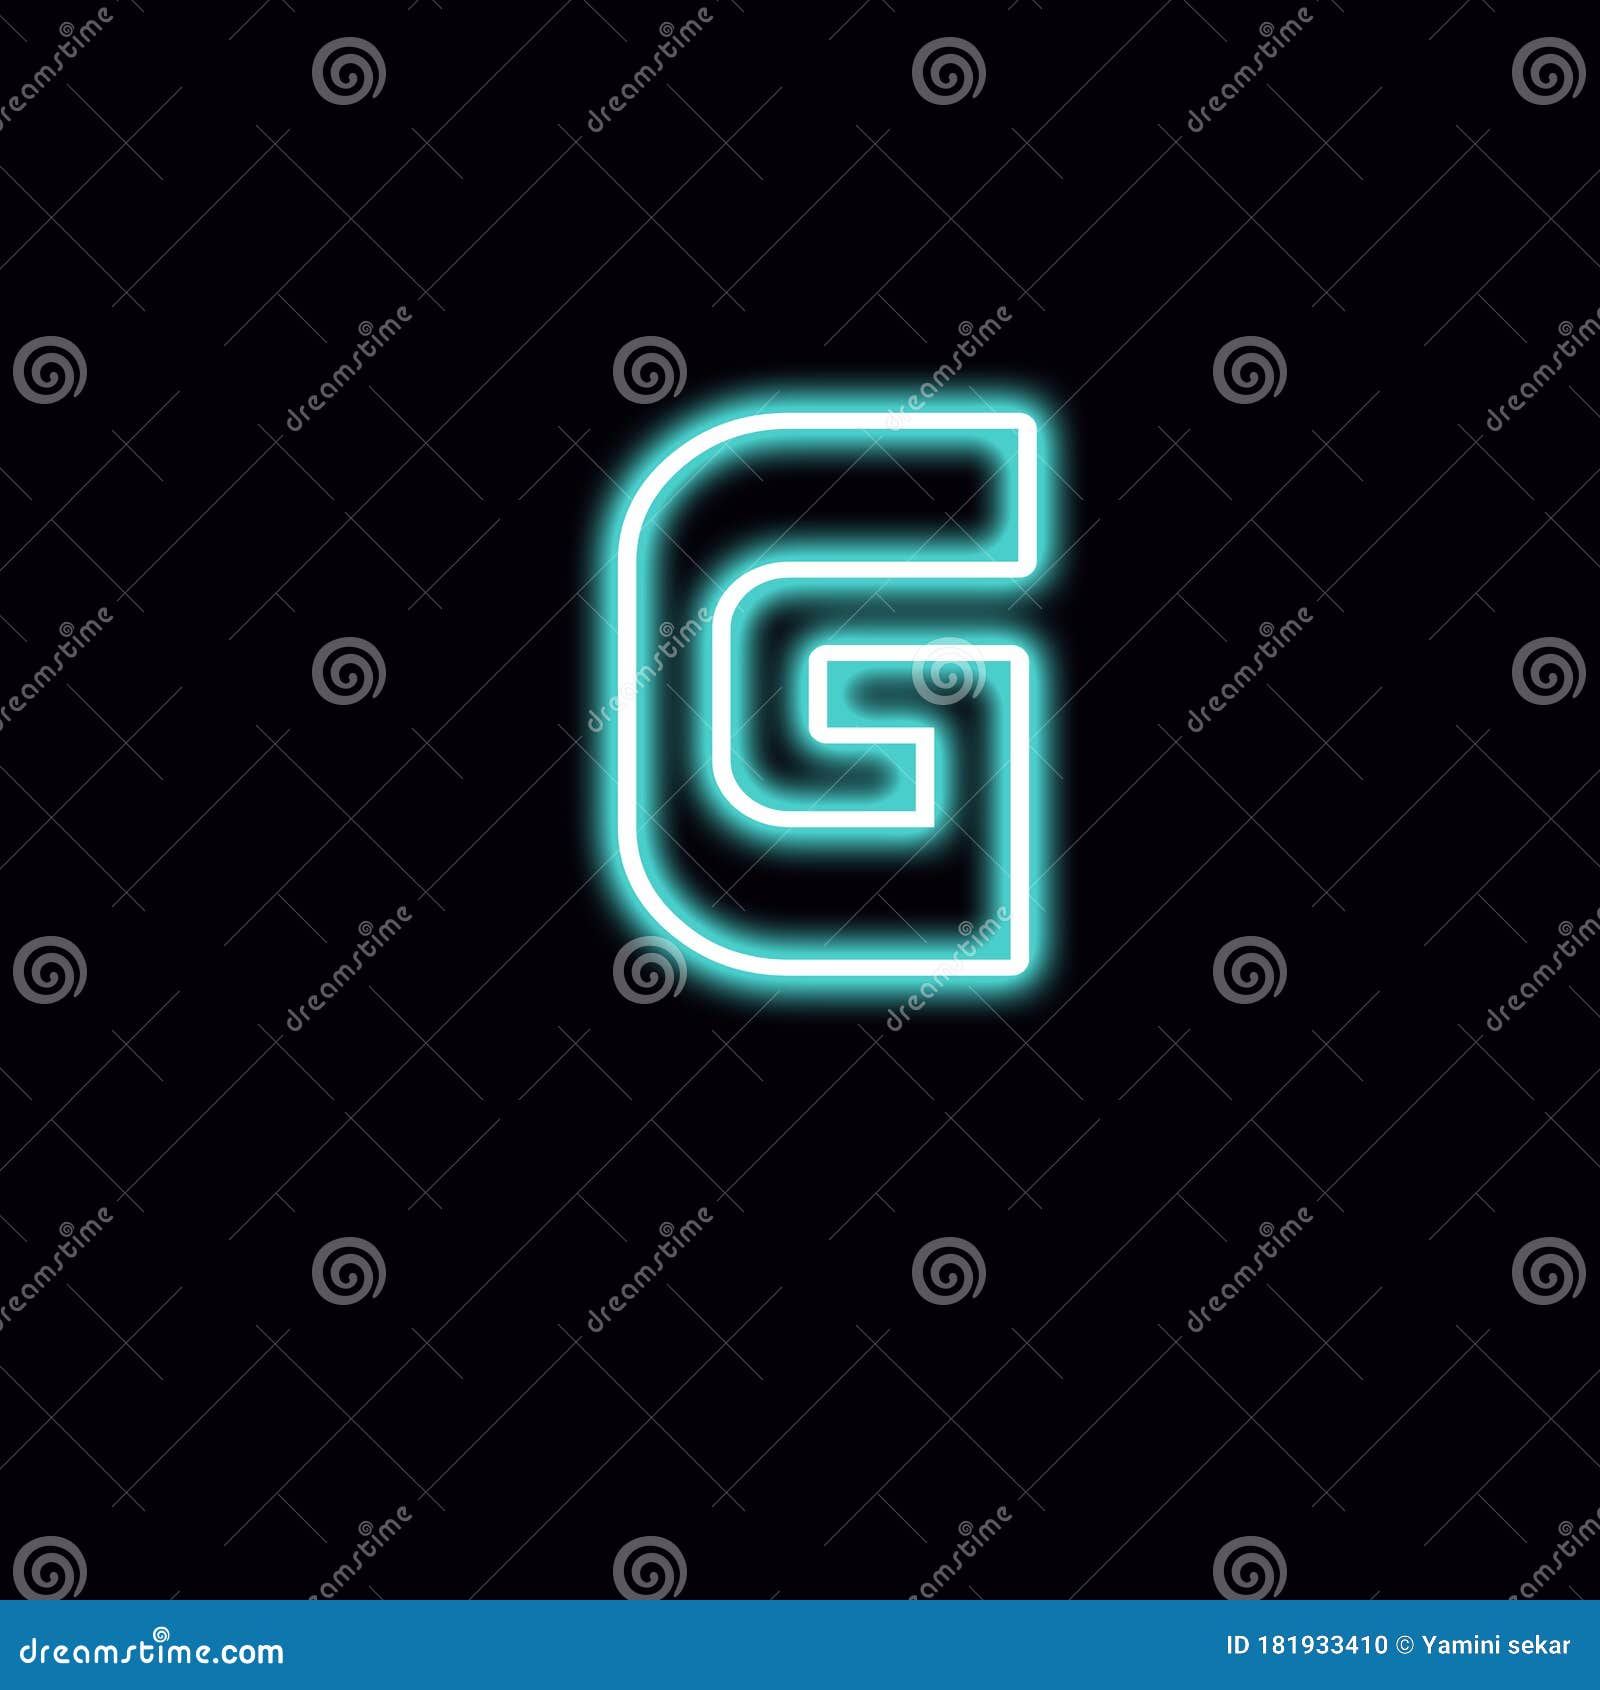 G Letter Logo with Gaming & Technology Concept by Nayem Ahmed on Dribbble